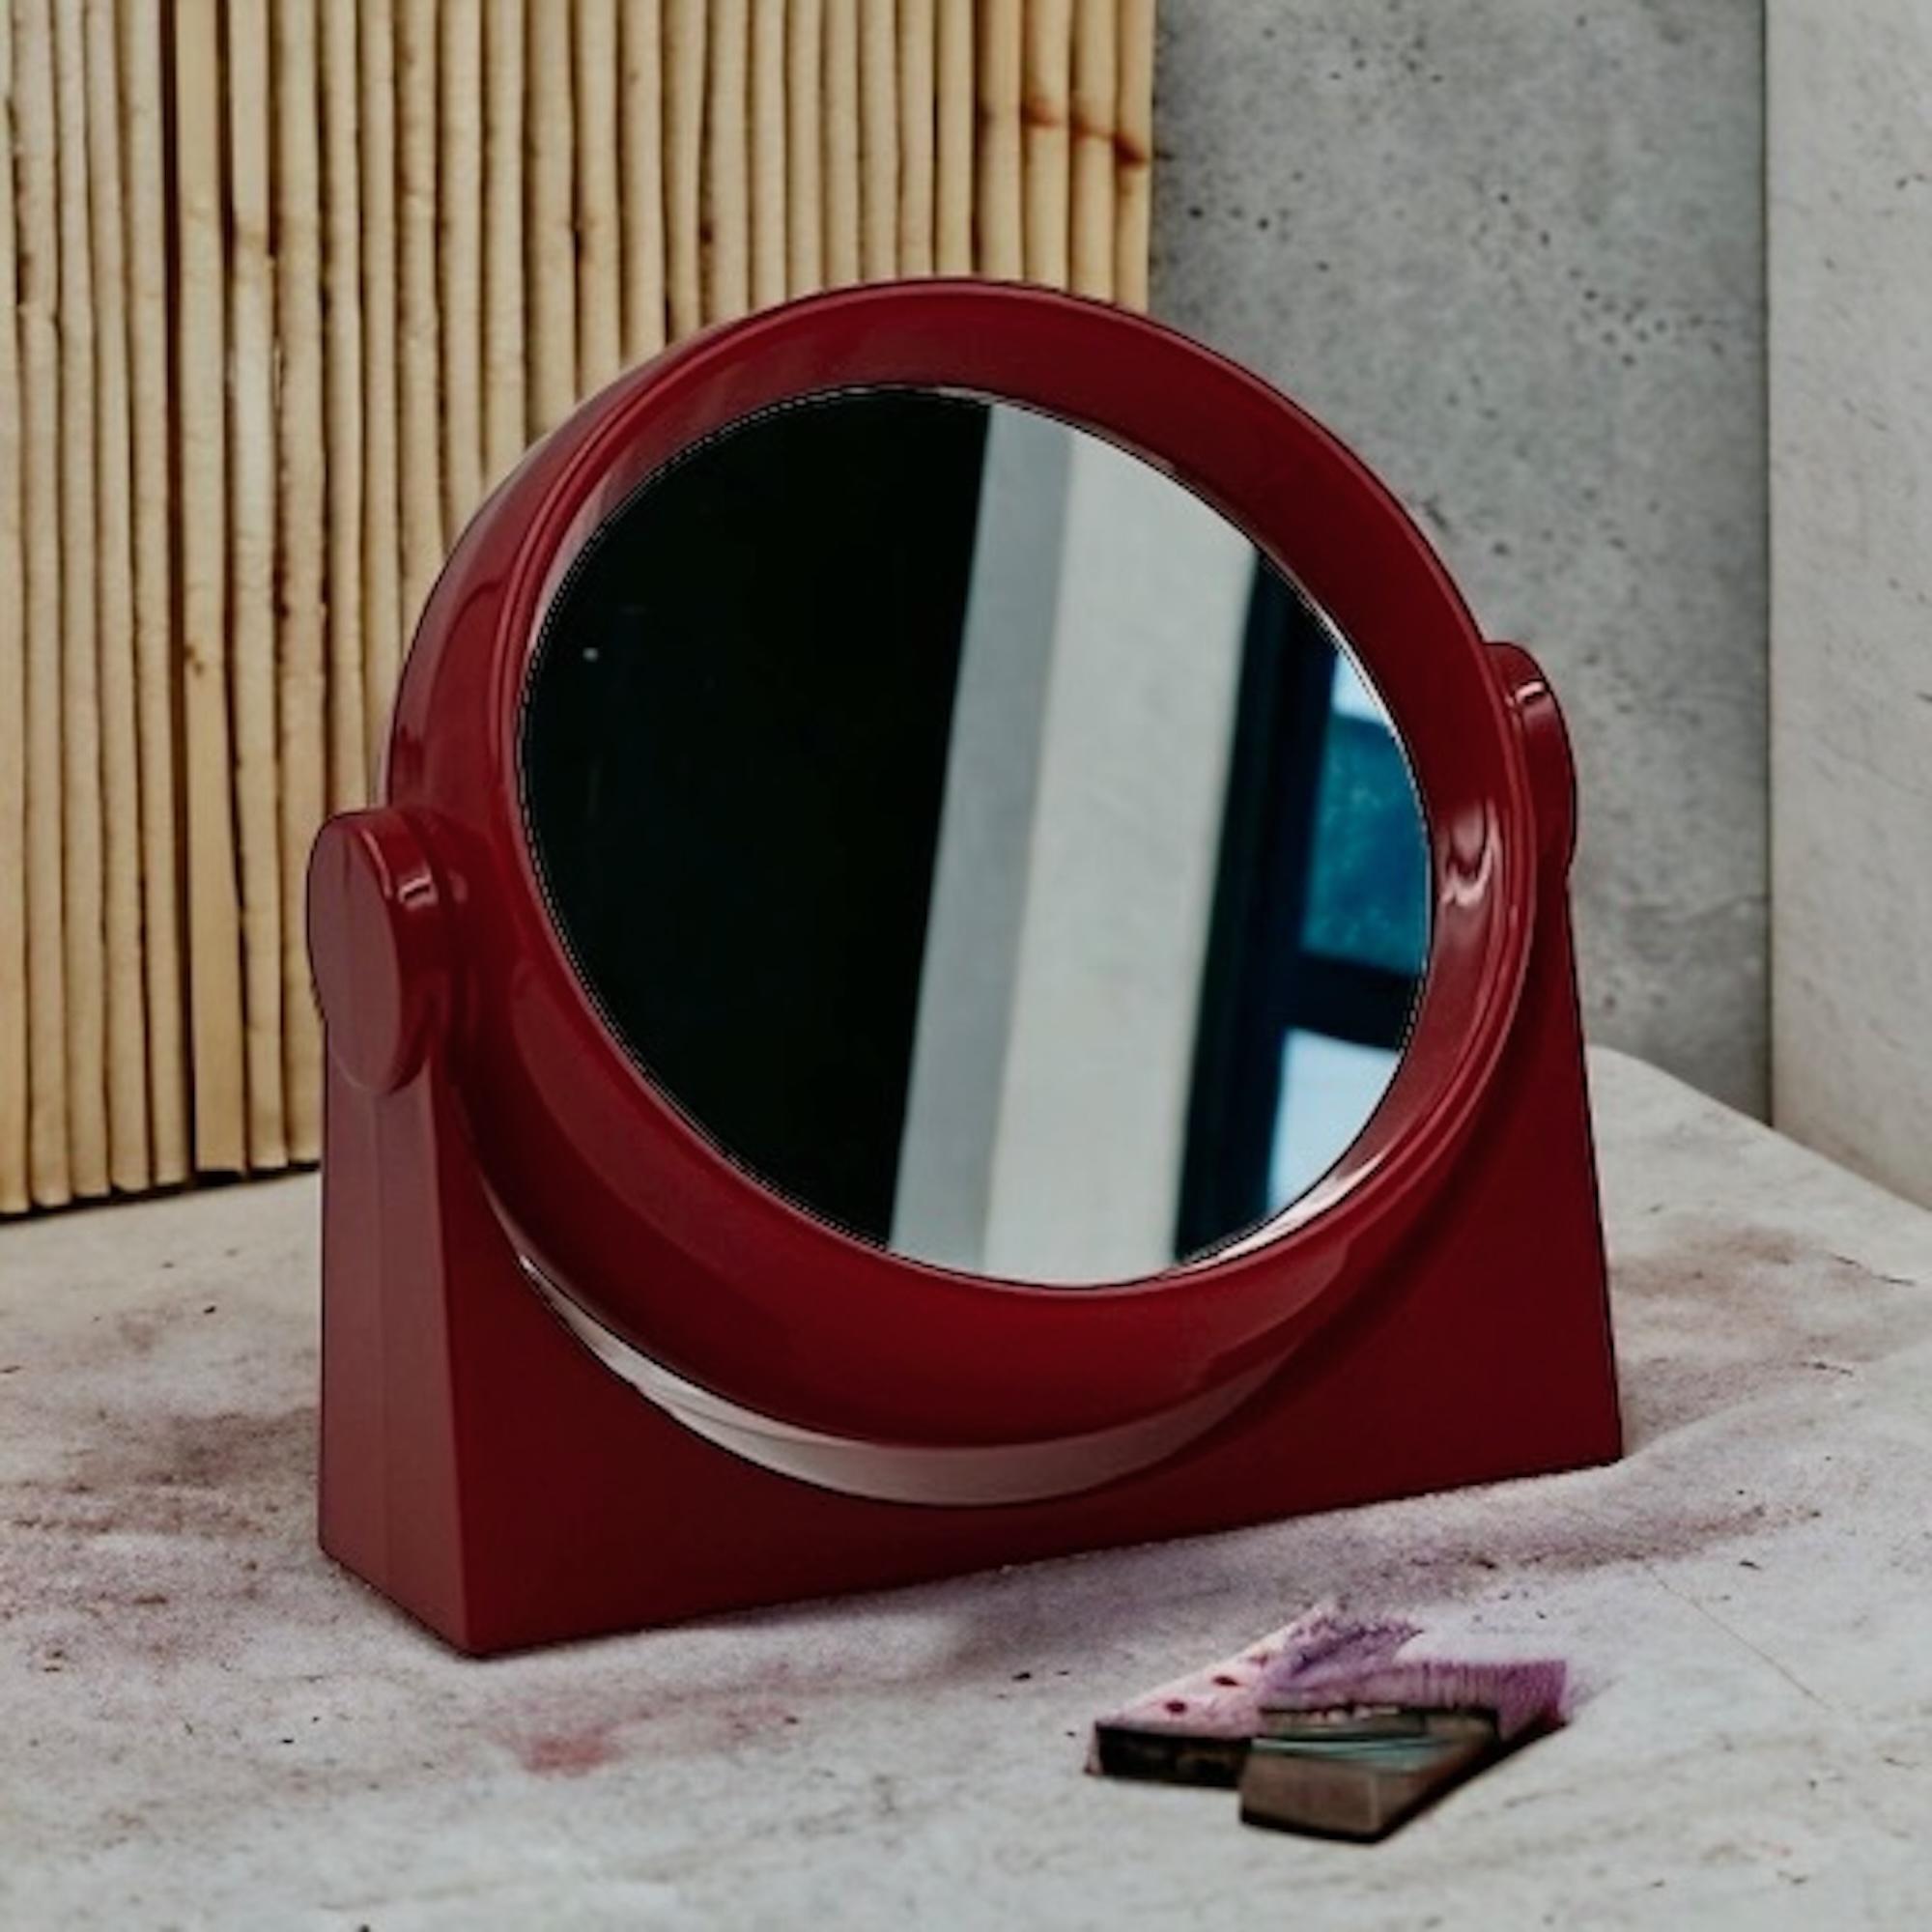 Space Age Red Table Mirror - Retro-Futuristic 1970s Design Made in Germany 4